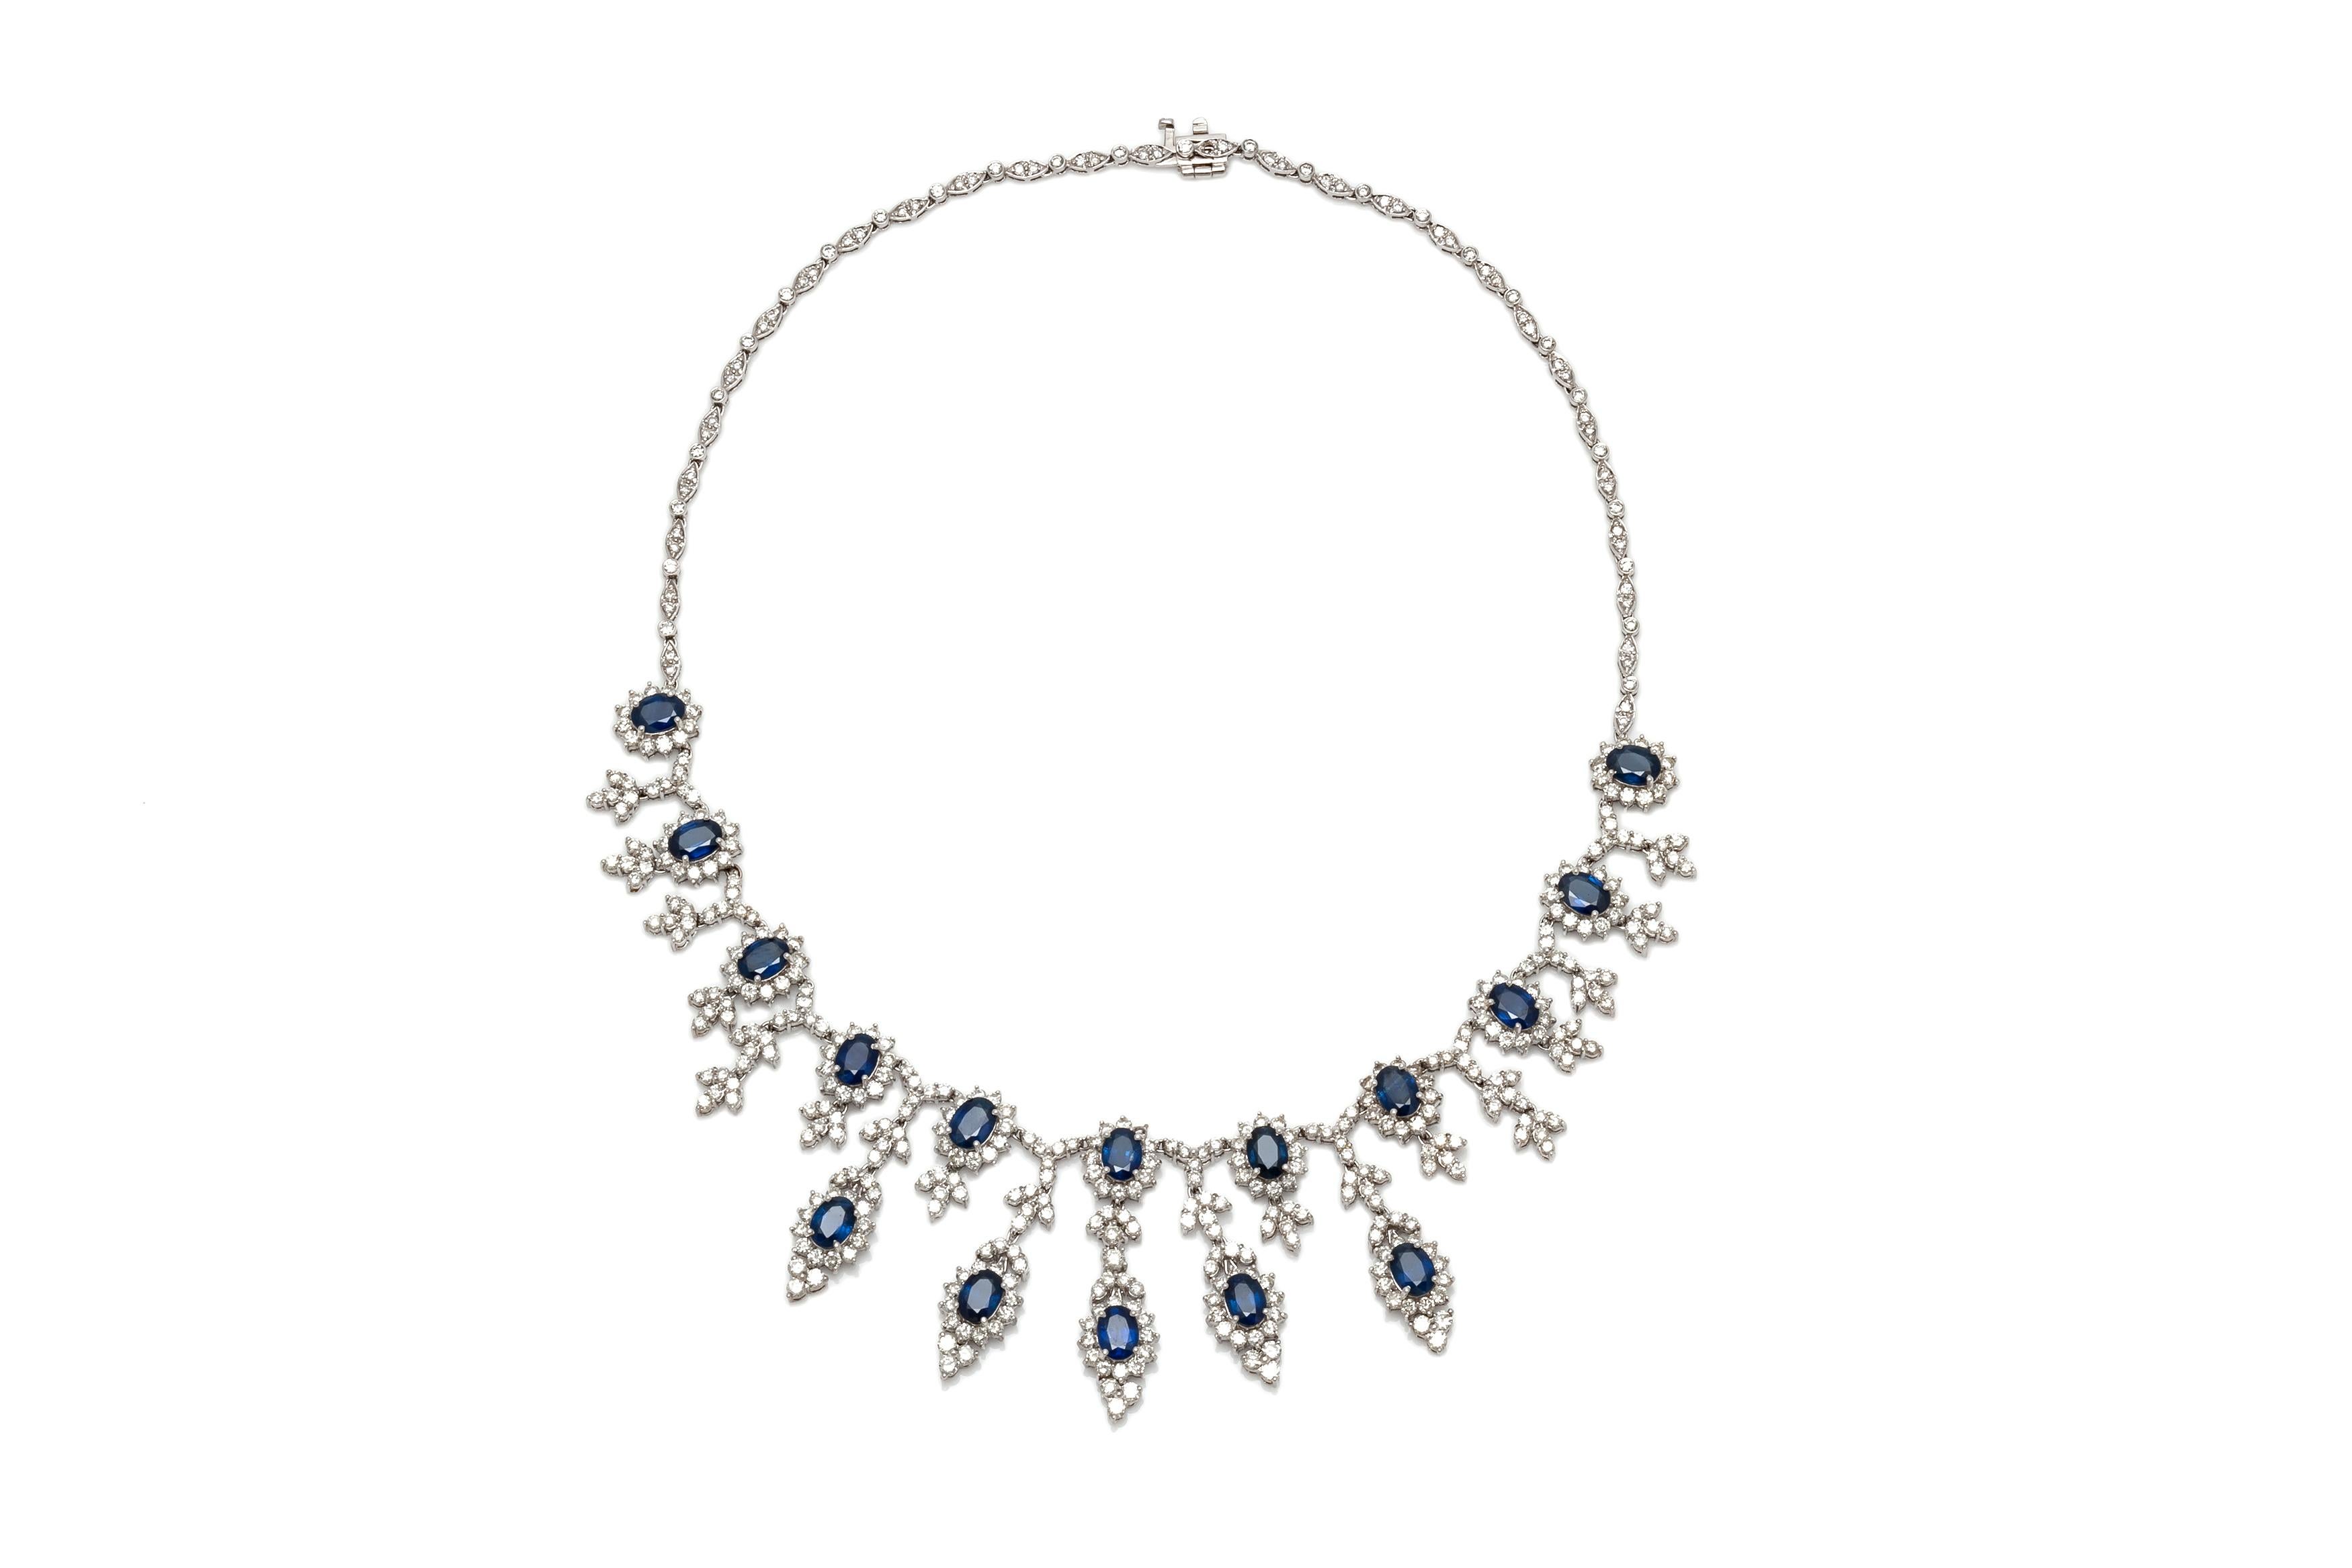 Necklace, finely crafted in 18k white gold with diamonds weighing a total of 16.52 carats and sapphires weighing a total of 16.58 carats. Circa 1990's.